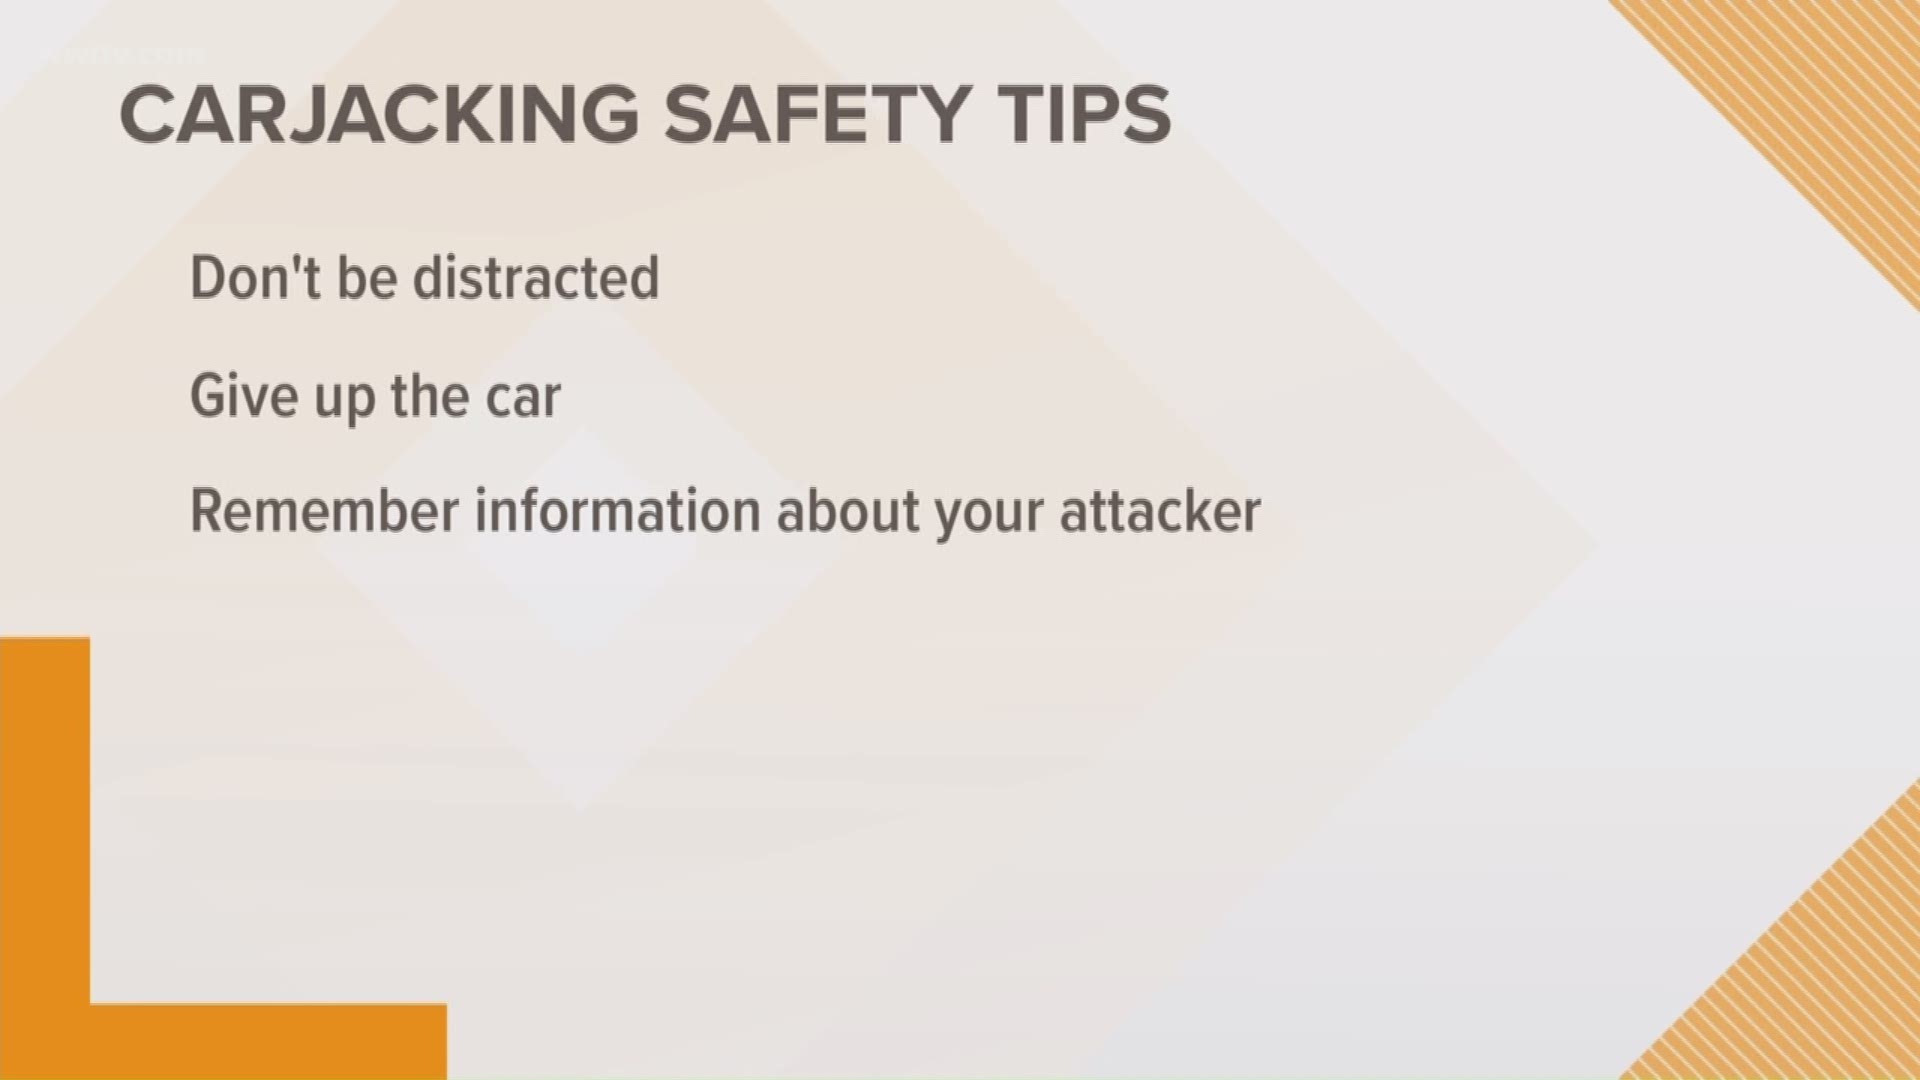 Tips to protect yourself from carjackers